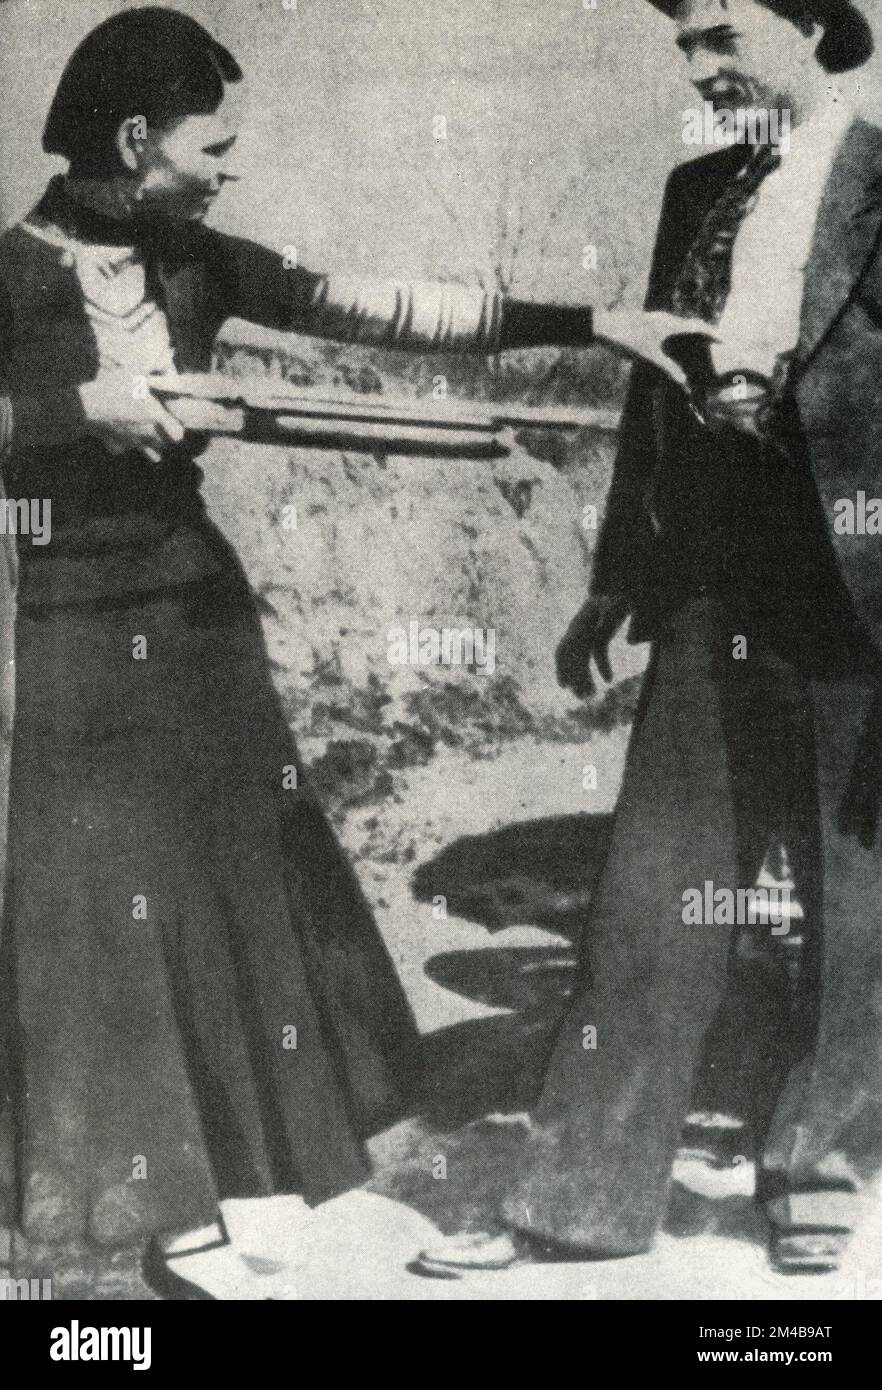 American criminal couple Bonnie Parker and Clyde Barrow playing, USA 1930s Stock Photo